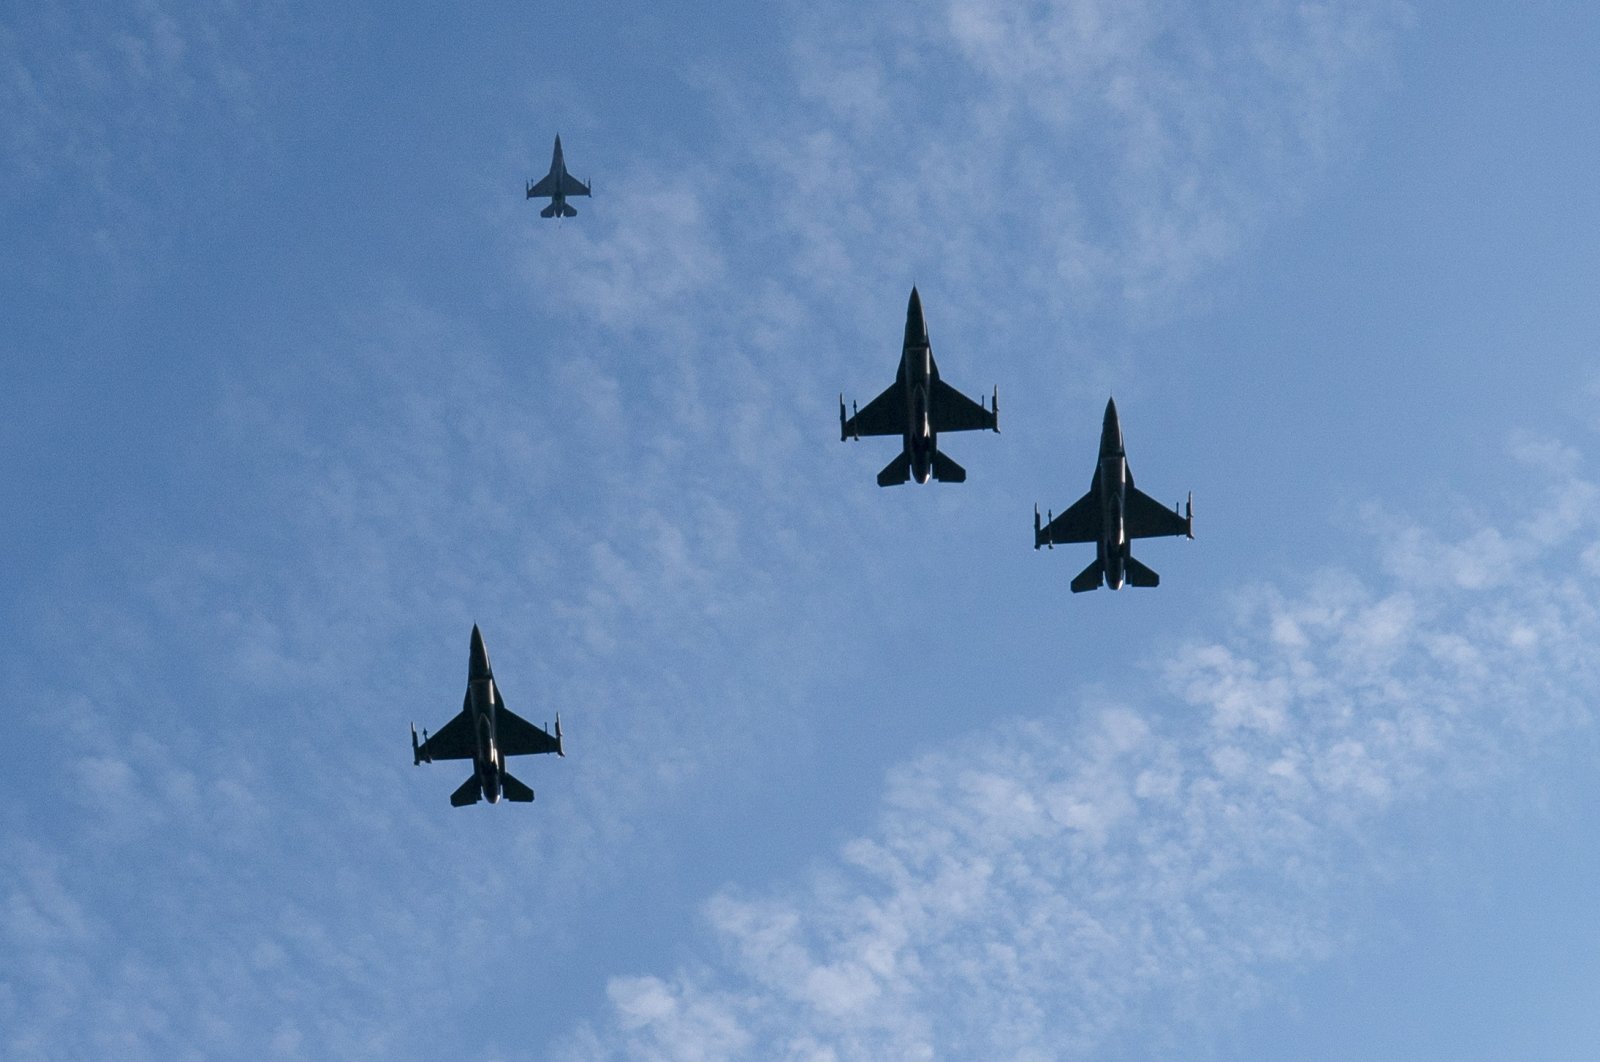 A formation of U.S. Air Force F-16 Fighting Falcons fly over during a ceremony in Arlington, Virginia, U.S., Nov. 11 2021. (EPA Photo)